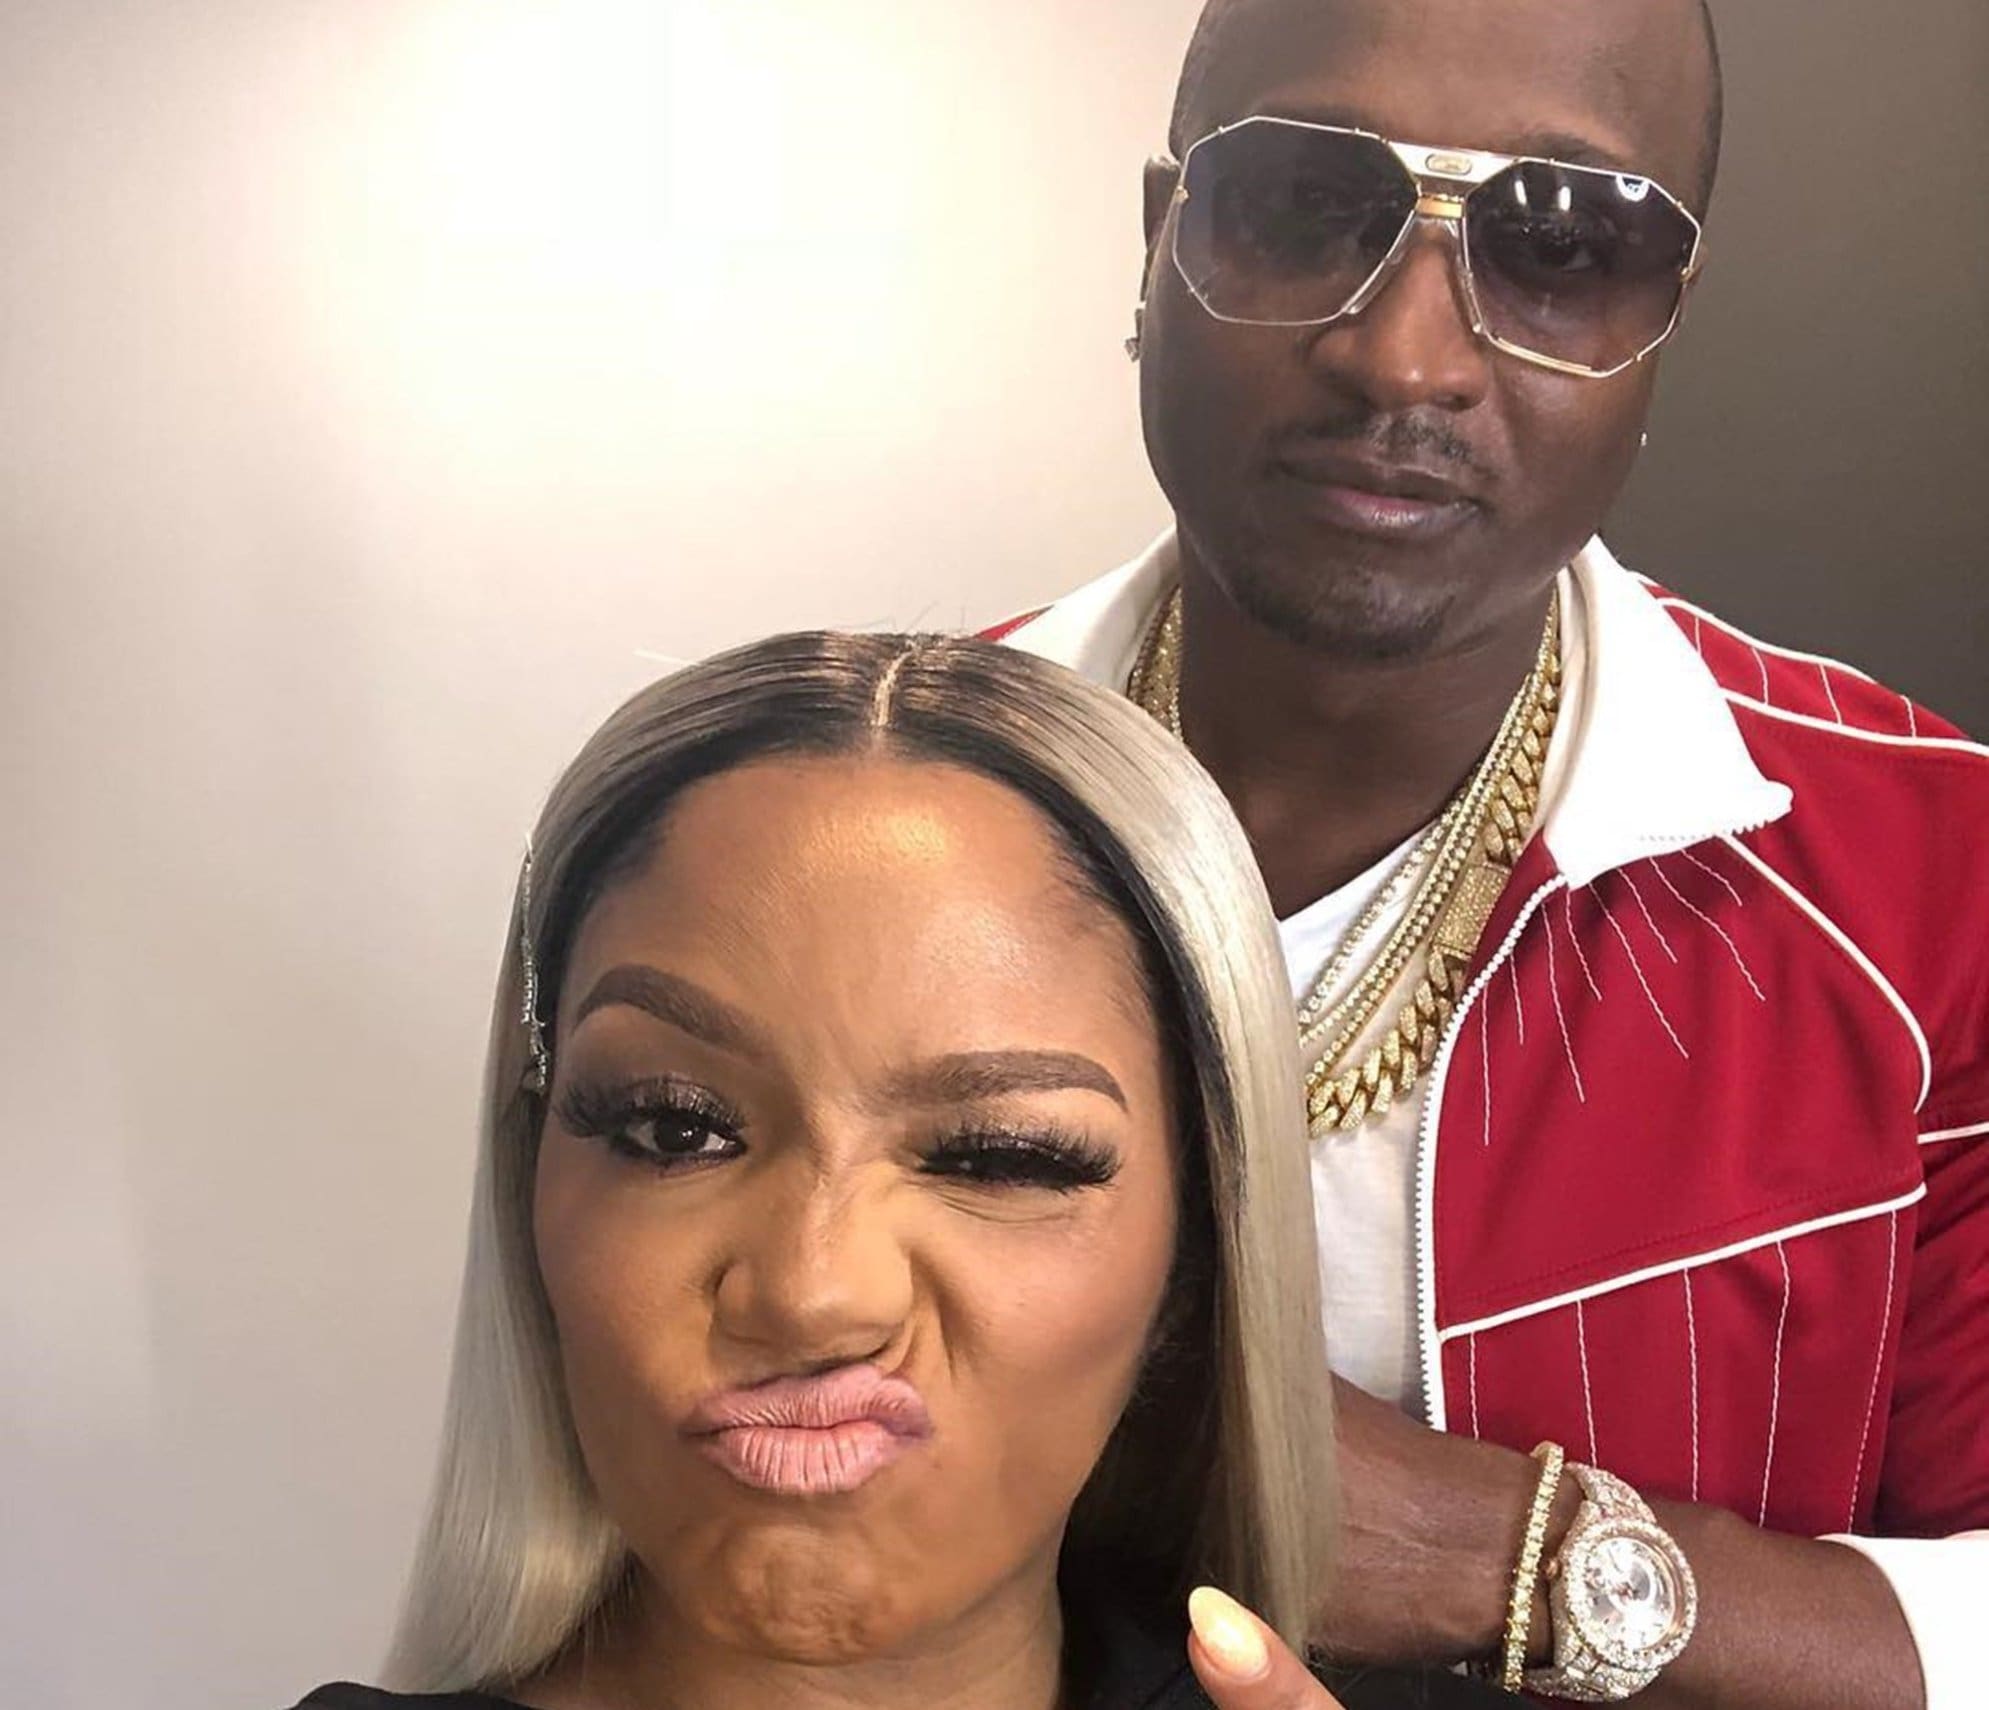 Rasheeda Frost Shares New Footage From The Frost Bistro And The Location Looks Amazing